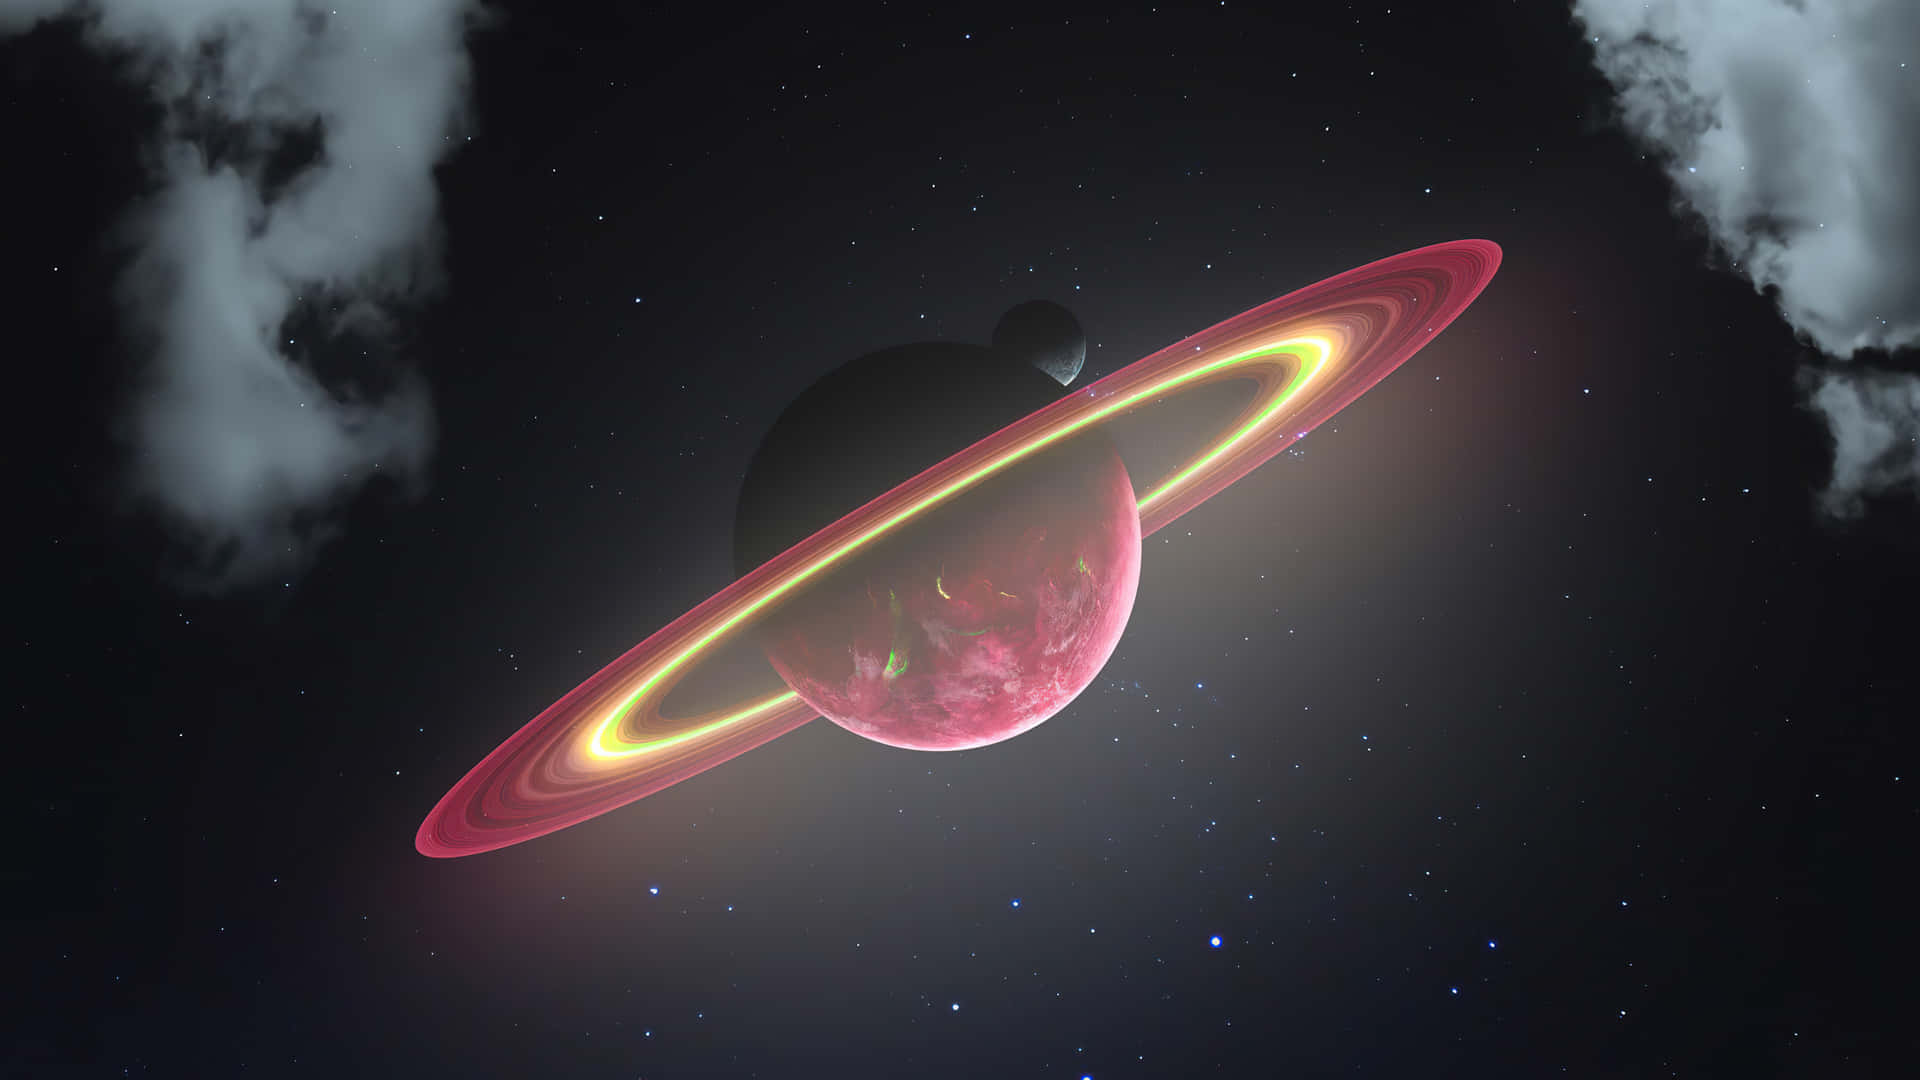 View of a fiery red planet, with stars in the background Wallpaper